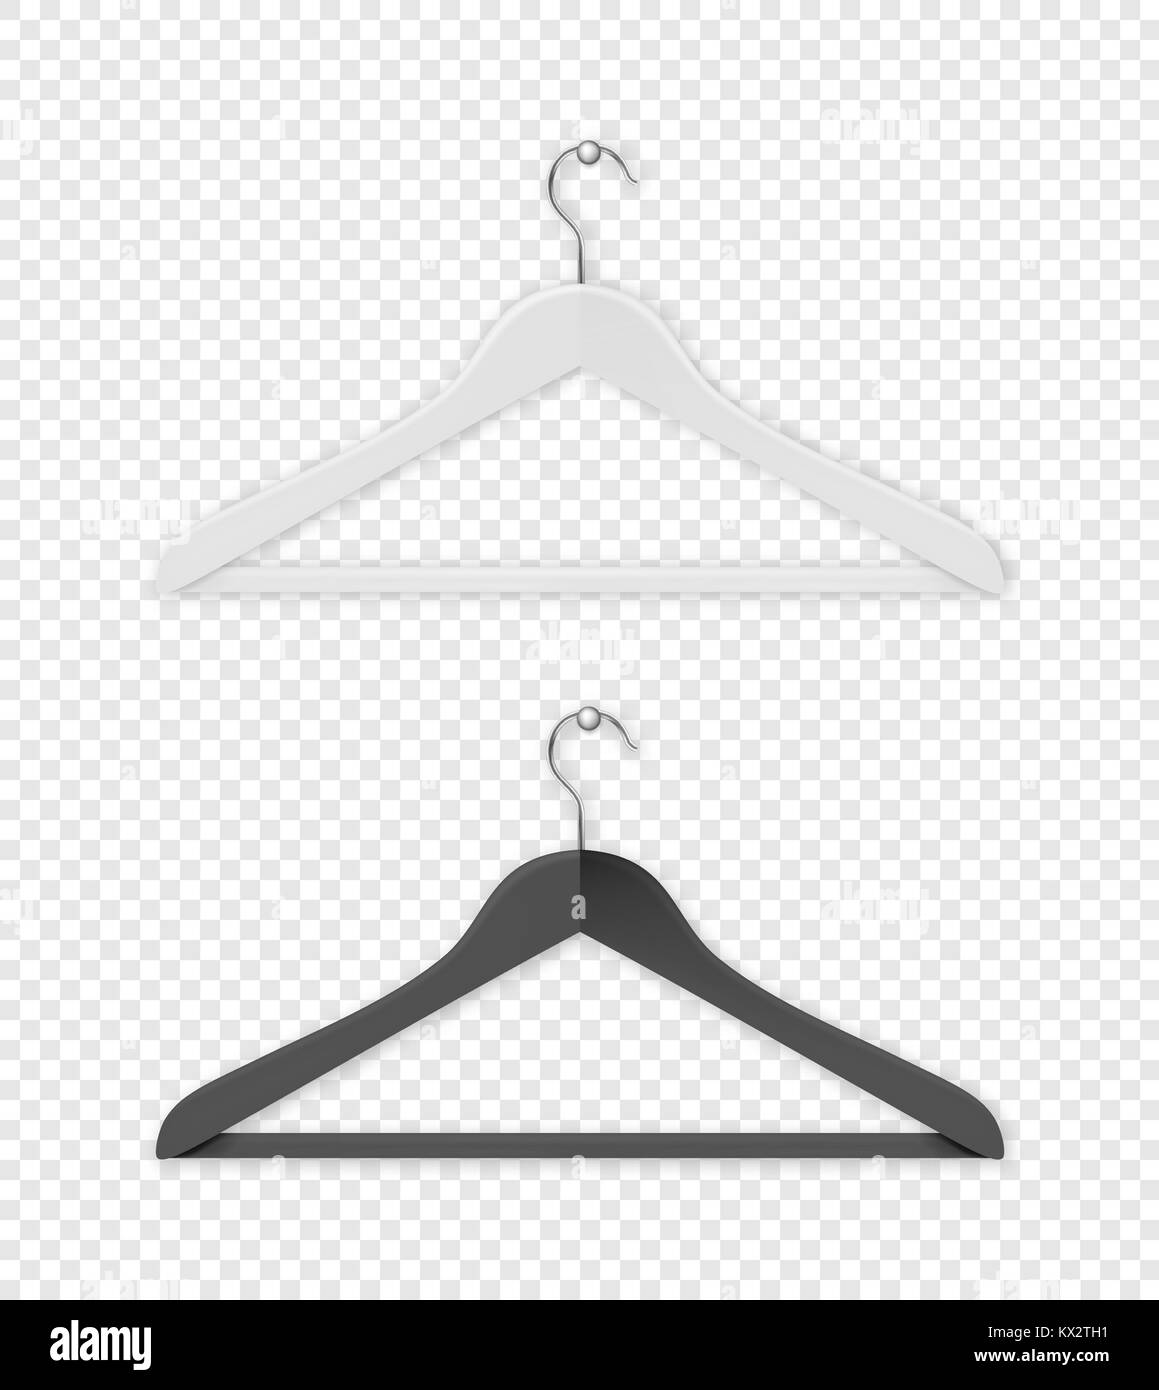 Realistic vector clothes coat black and white hanger icon close up isolated on transparency grid background. Design template, clipart or mockup for graphics, advertising etc Stock Vector